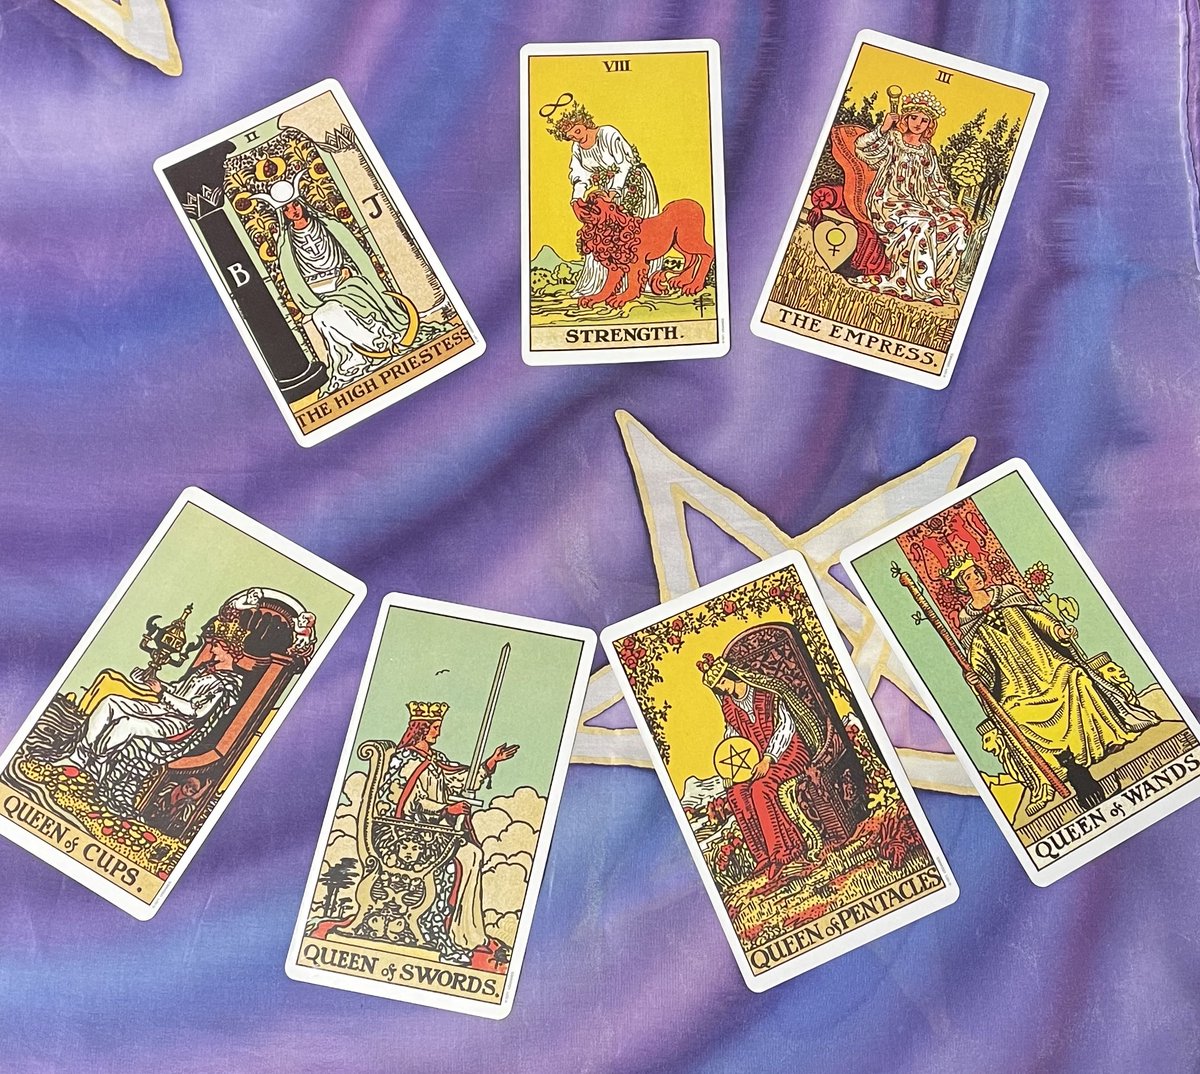 To mark #InternationalWomensDay last week, and women's history month, this week's blog from #PaganPathwaysUK is looking at the women of the #tarot. Read it at paganpathways.uk/f/priestess-em… and please share and subscribe!

#paganblog #paganwriting #tarotreading #pagan #witch #wicca